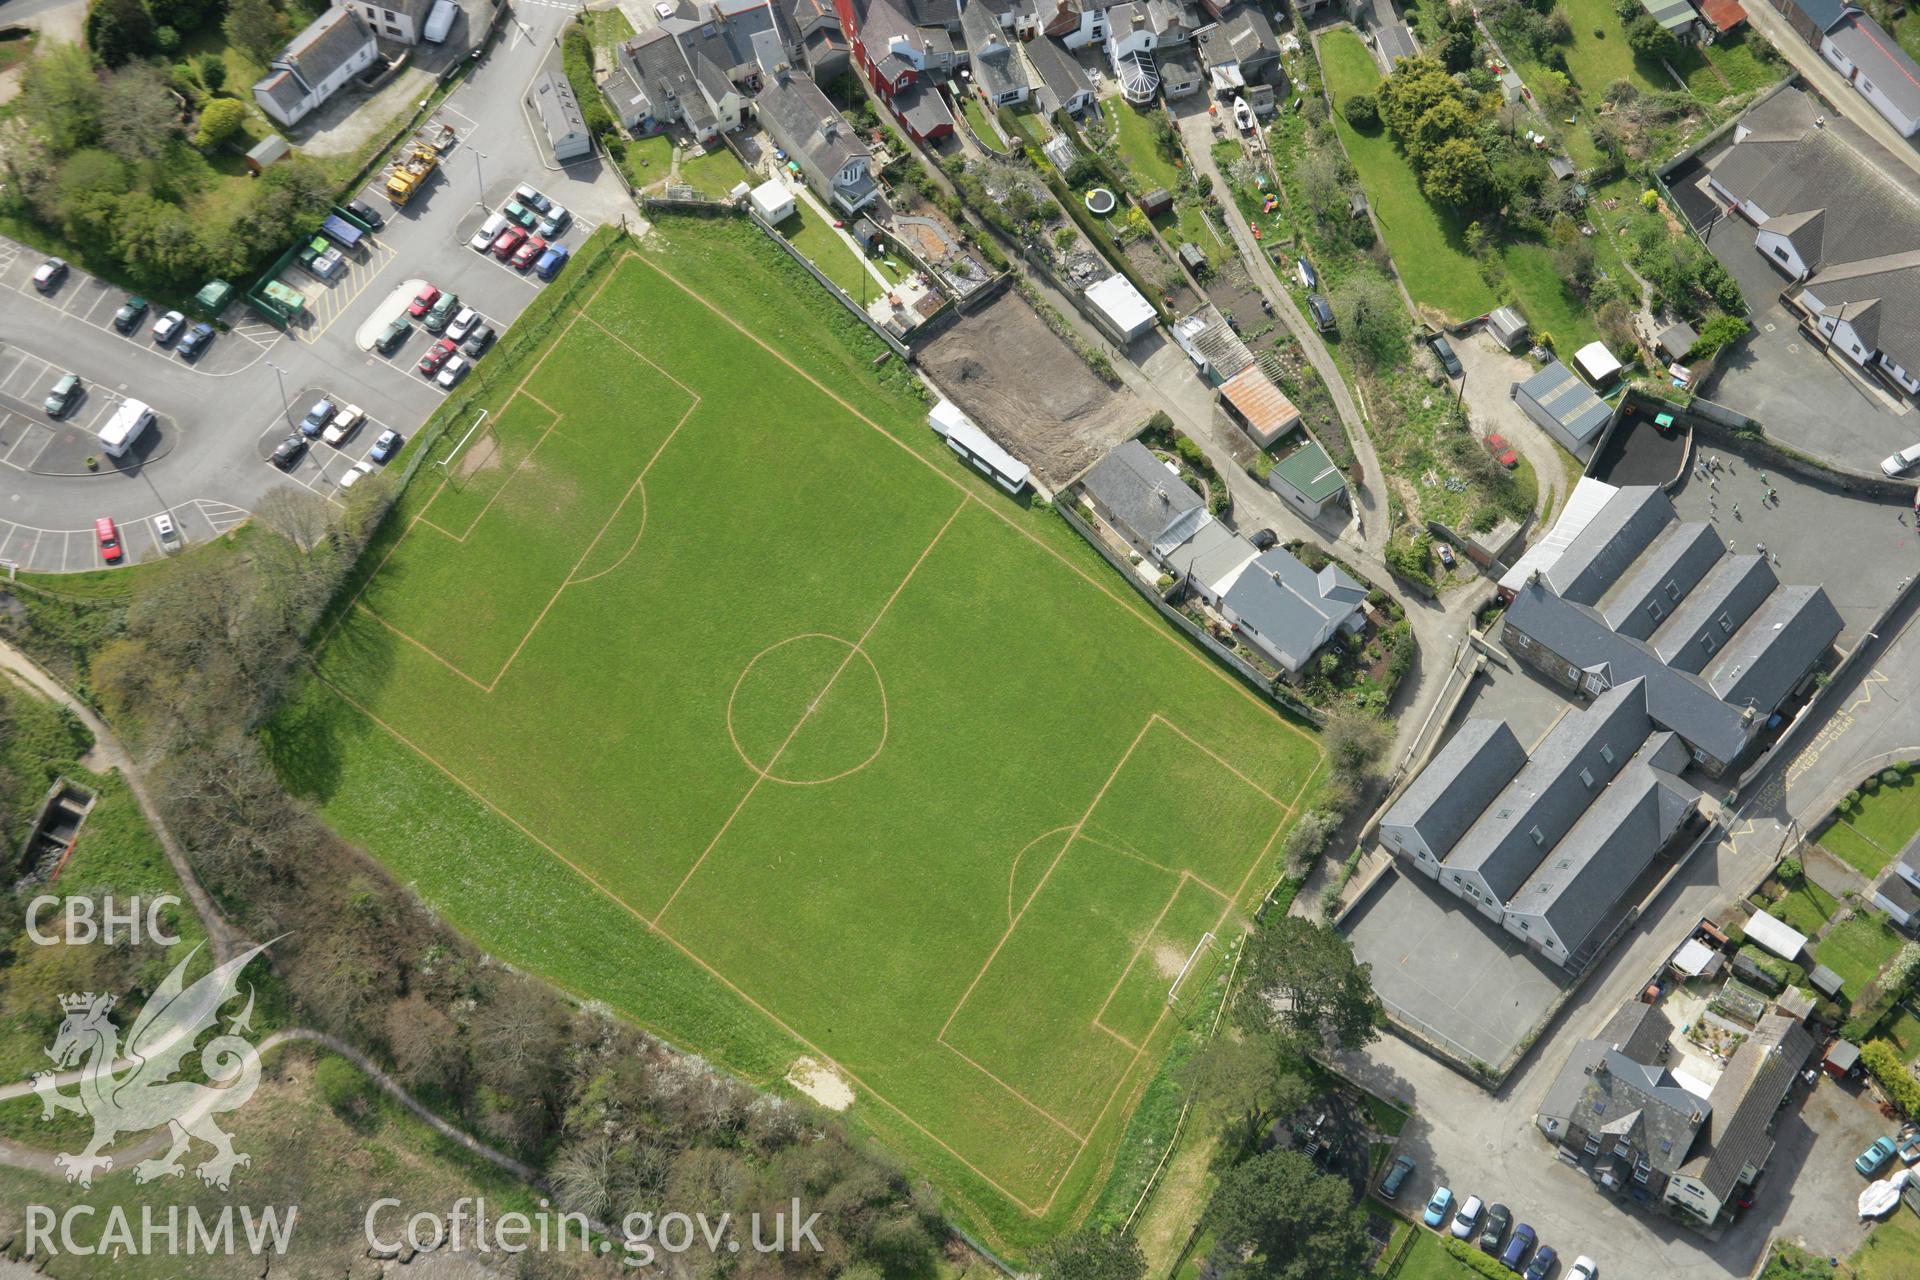 RCAHMW colour oblique aerial photograph of St Dogmaels. Taken on 17 April 2007 by Toby Driver